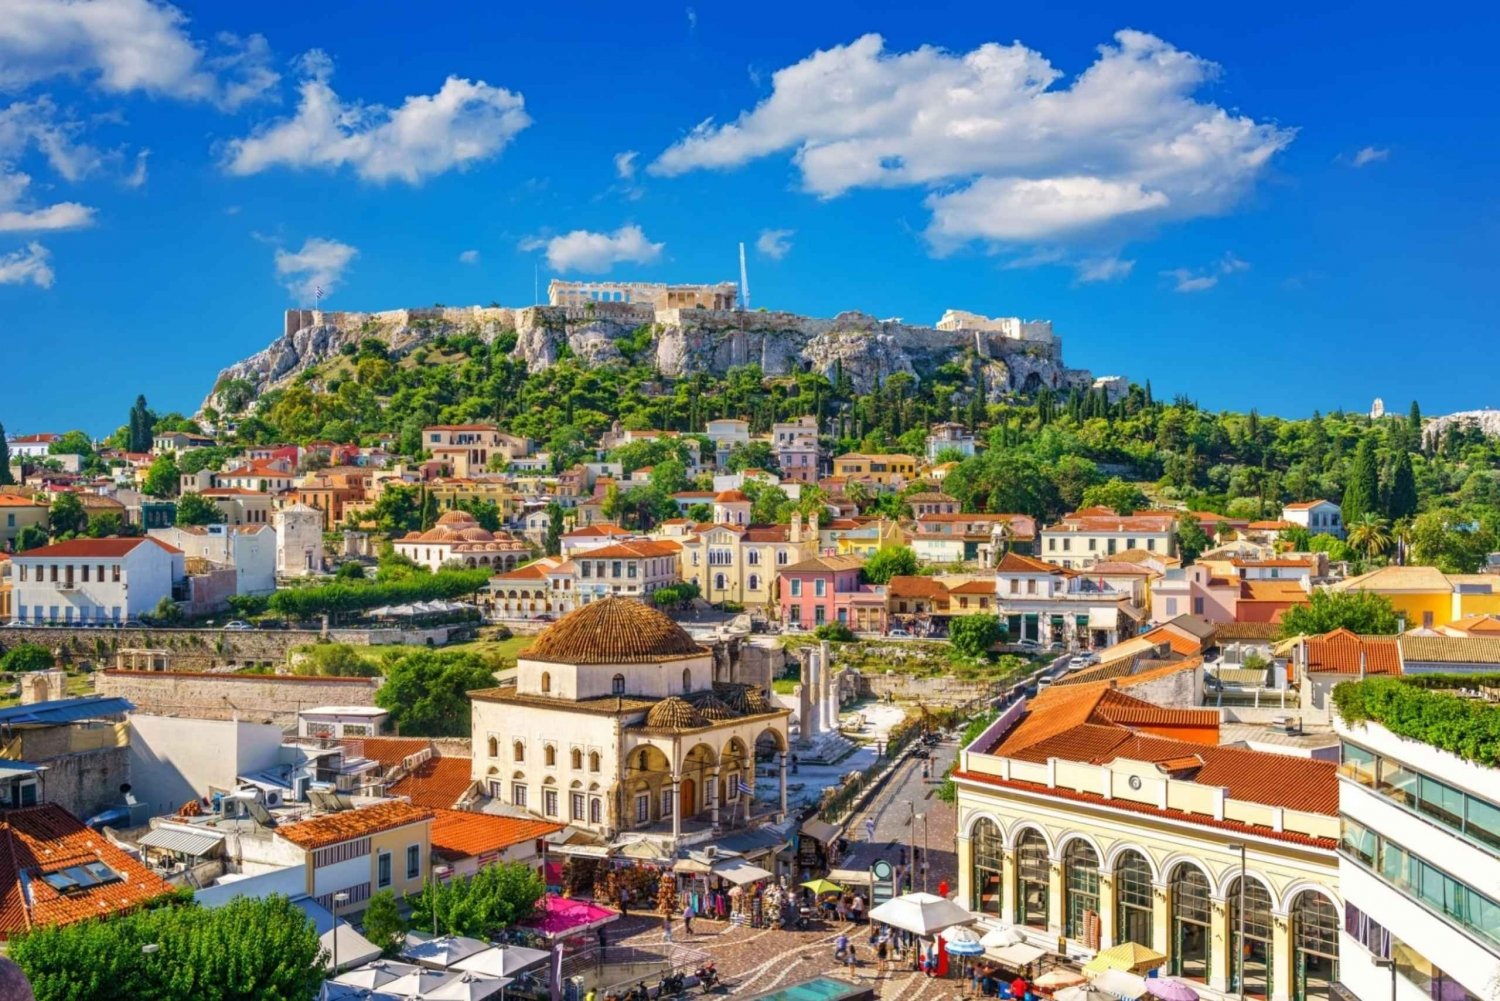 Athens: Acropolis Combo Ticket with 7 Sites Included